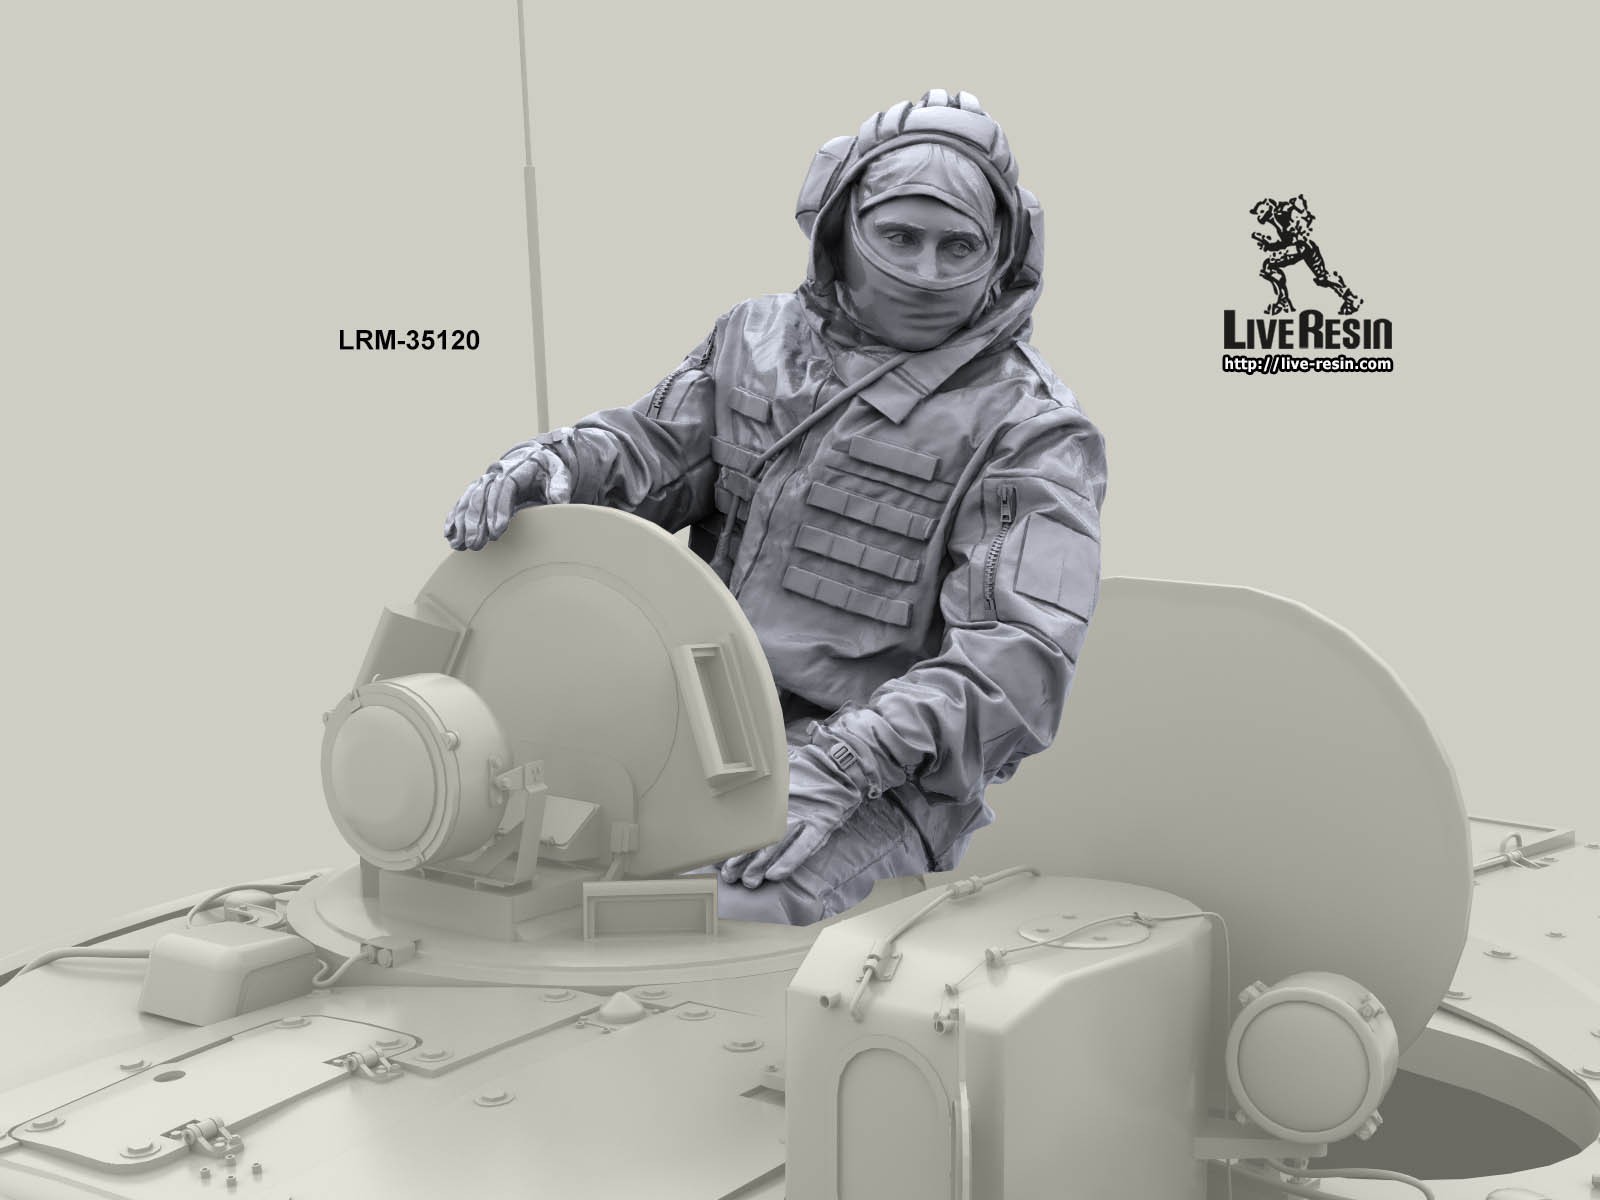 Modern Russians from Live Resin | Armorama™